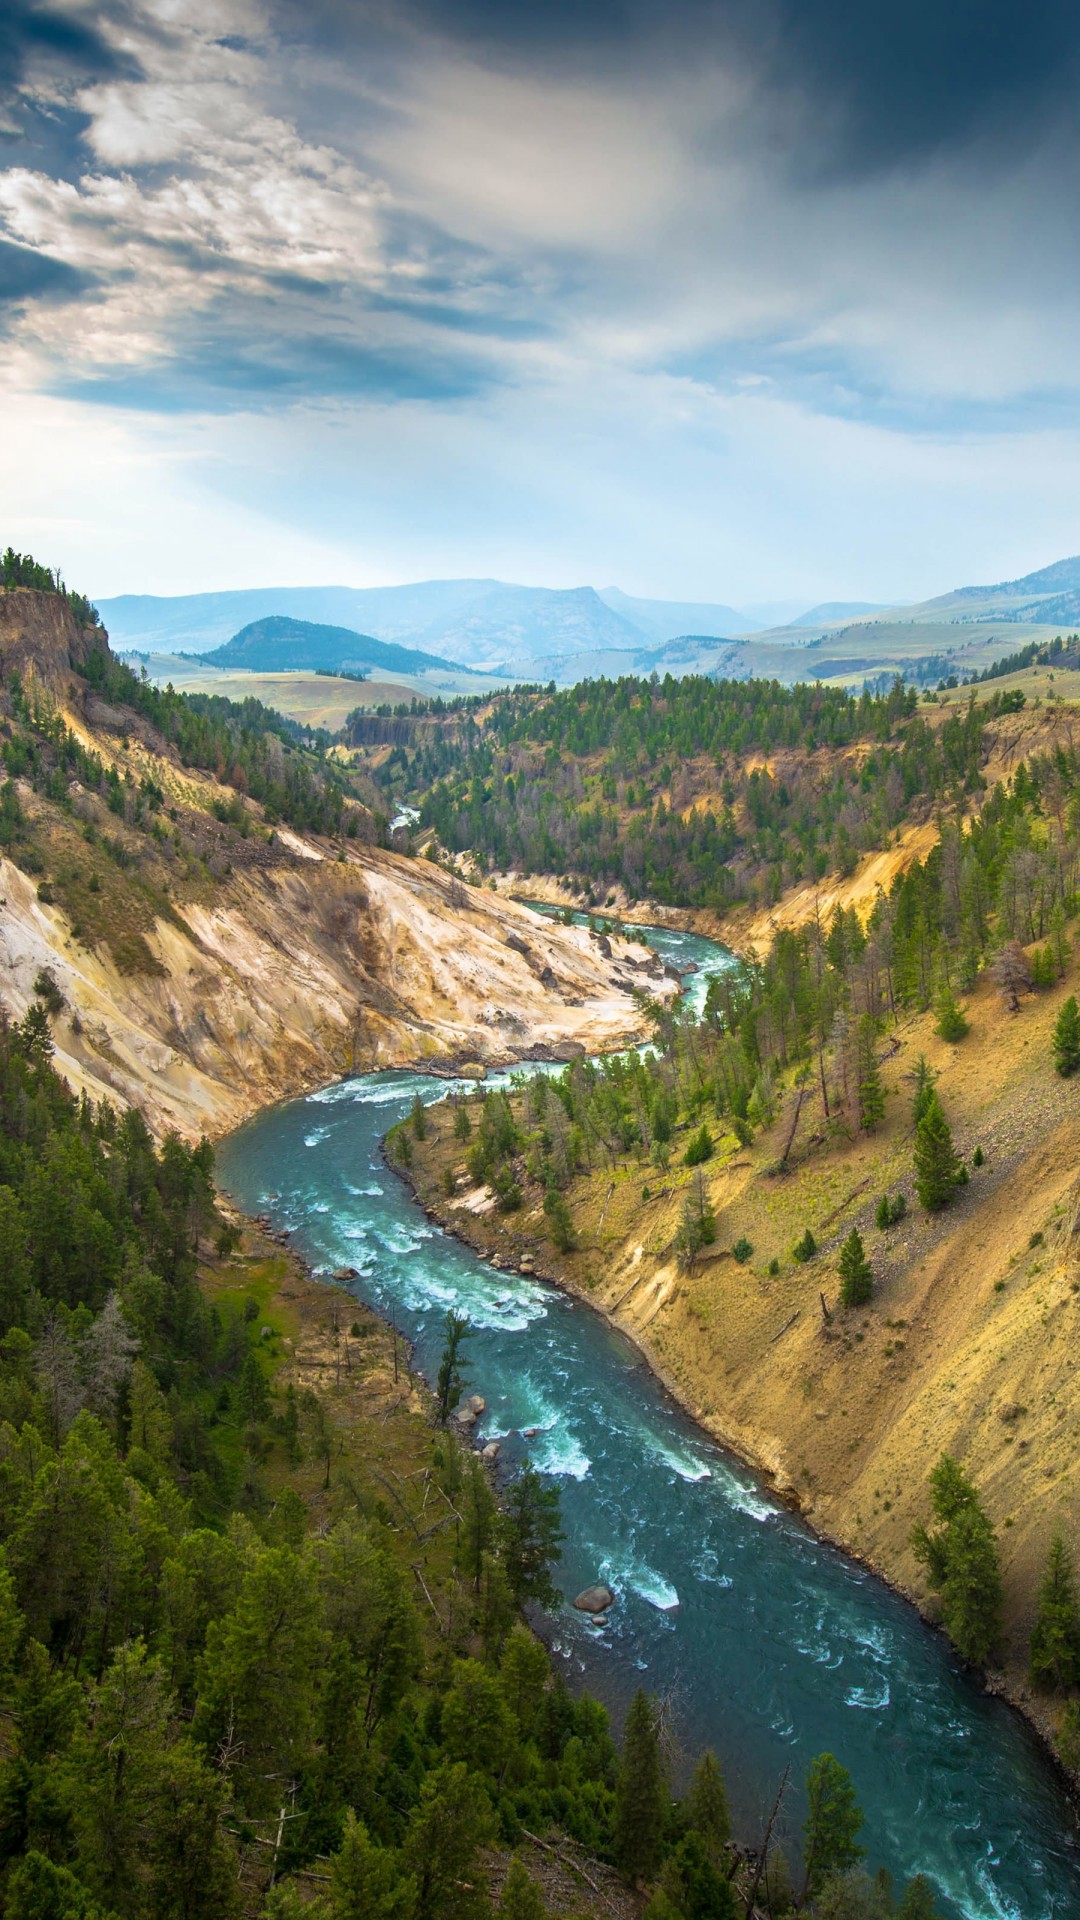 The River, Grand Canyon of Yellowstone National Park, USA Wallpaper for SAMSUNG Galaxy S5